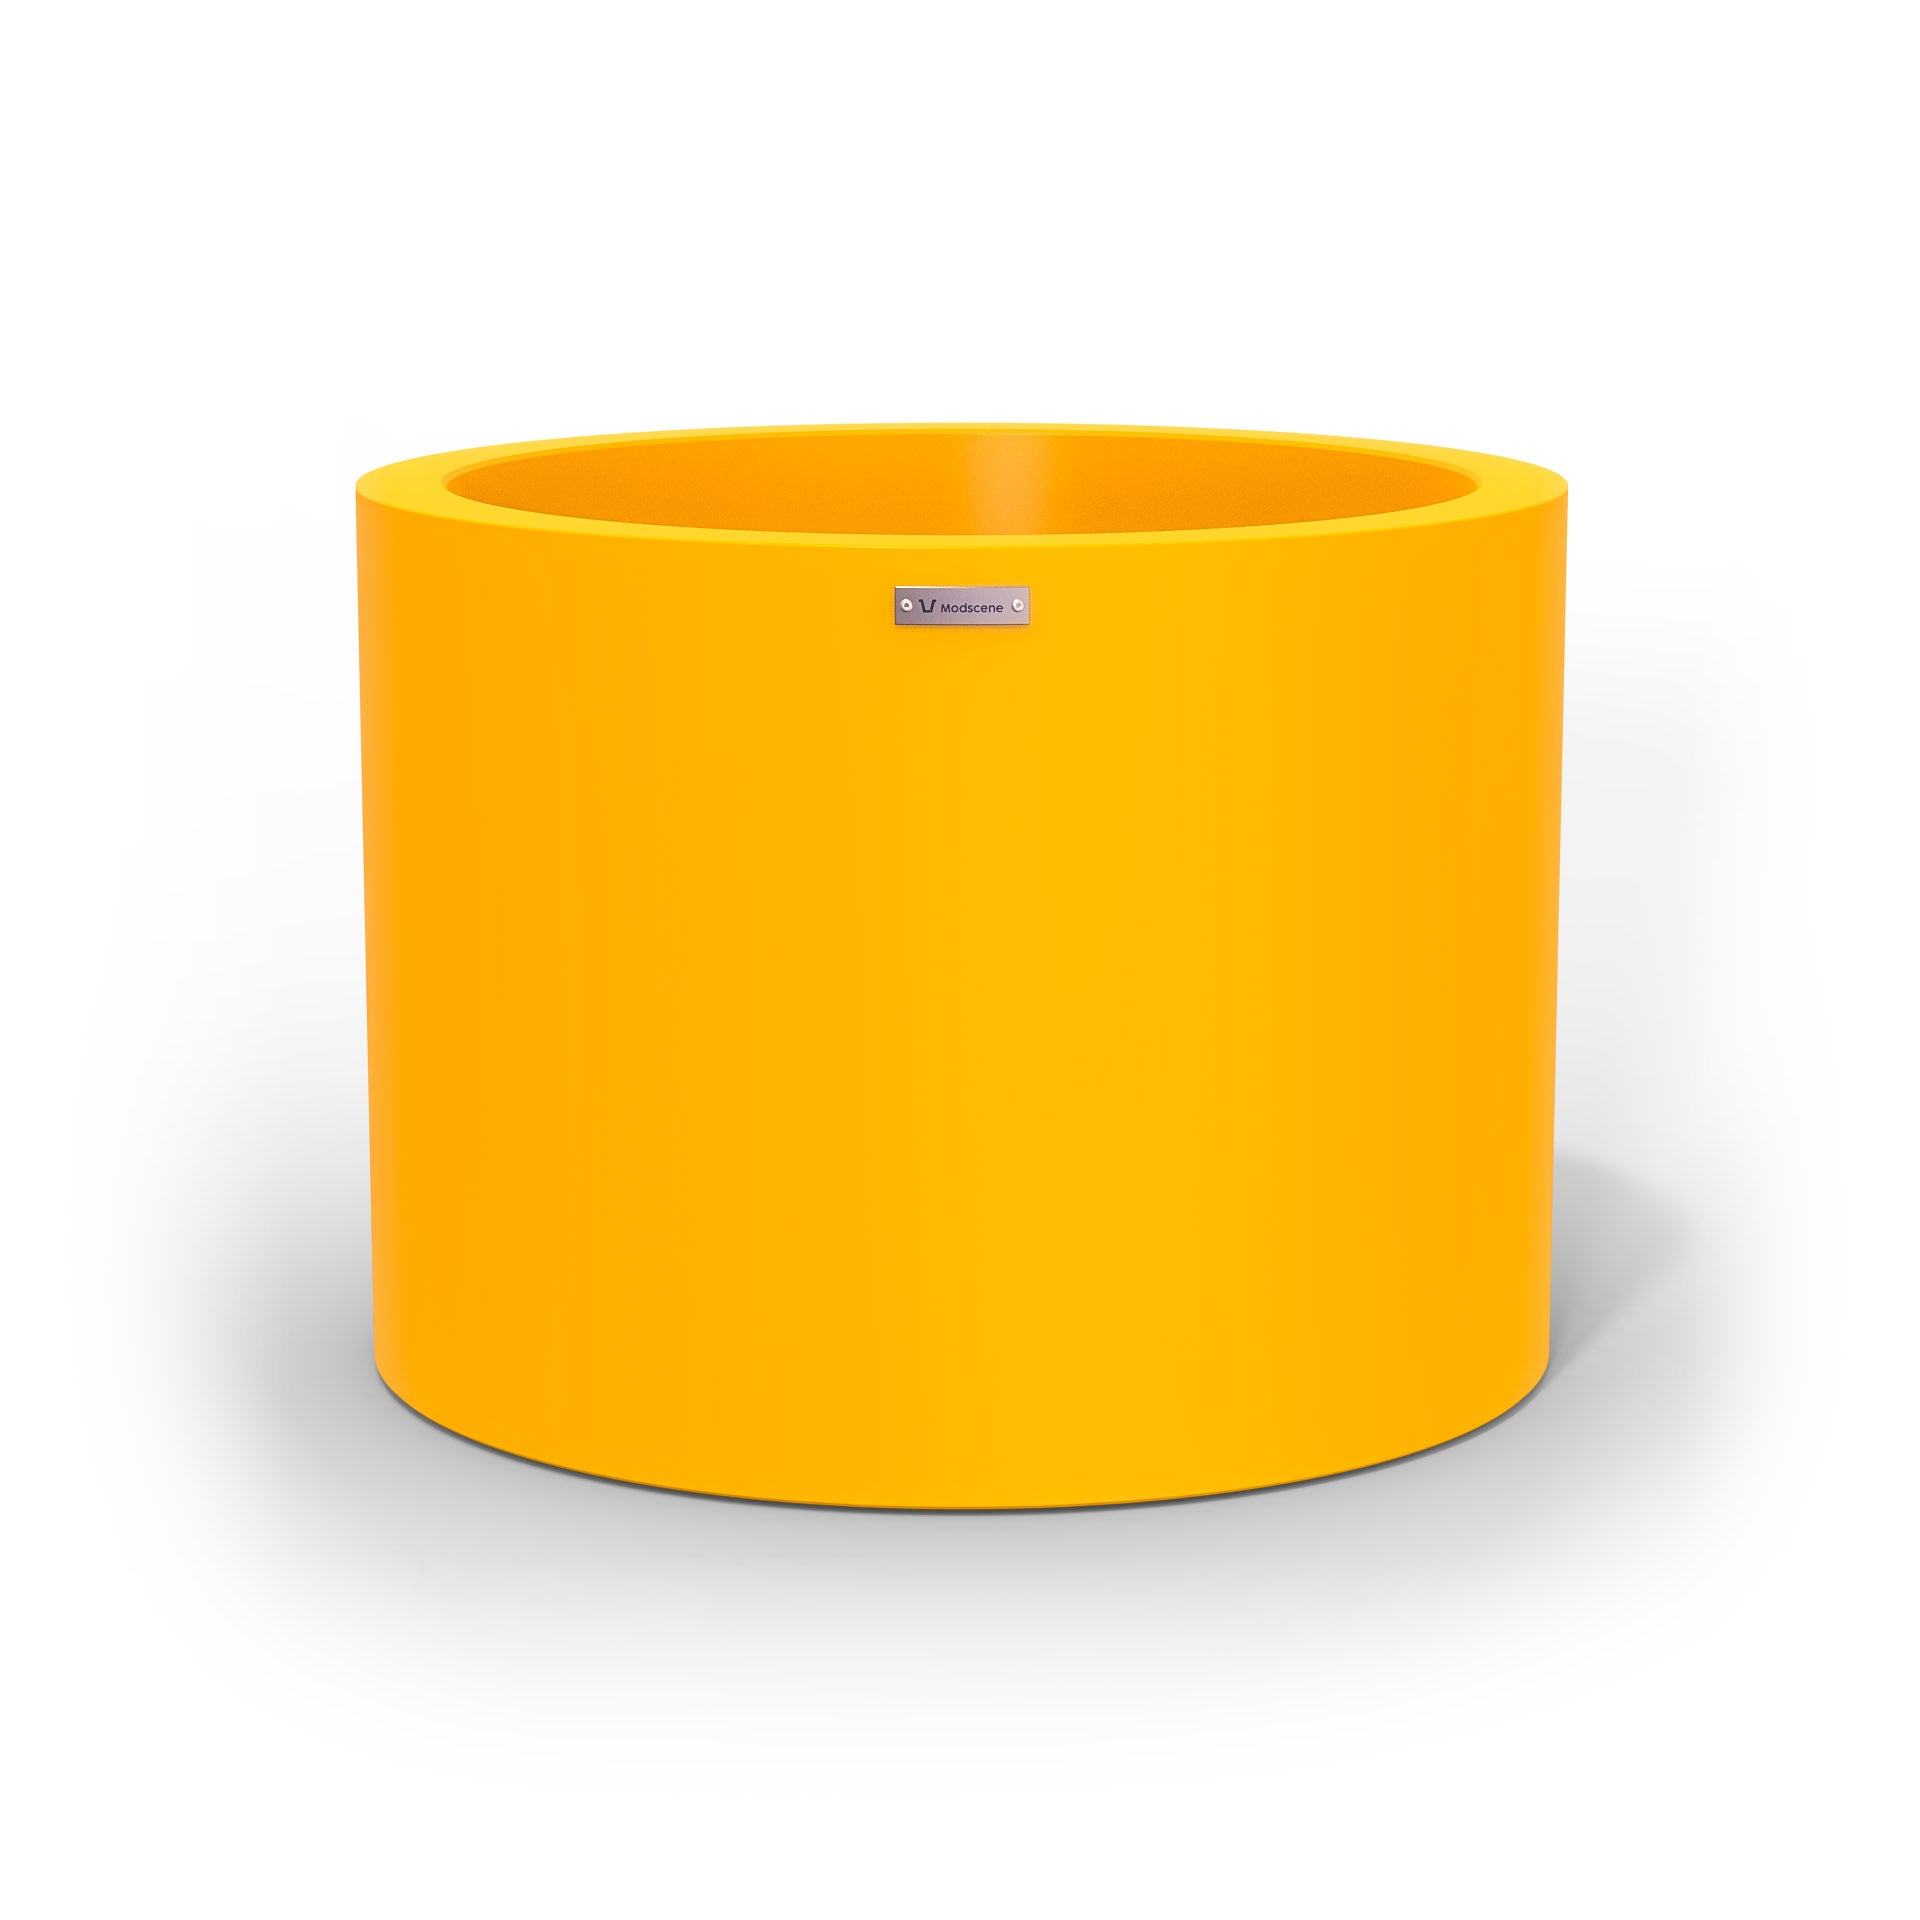 A cylinder shaped pot planter in yellow made by Modscene NZ. 